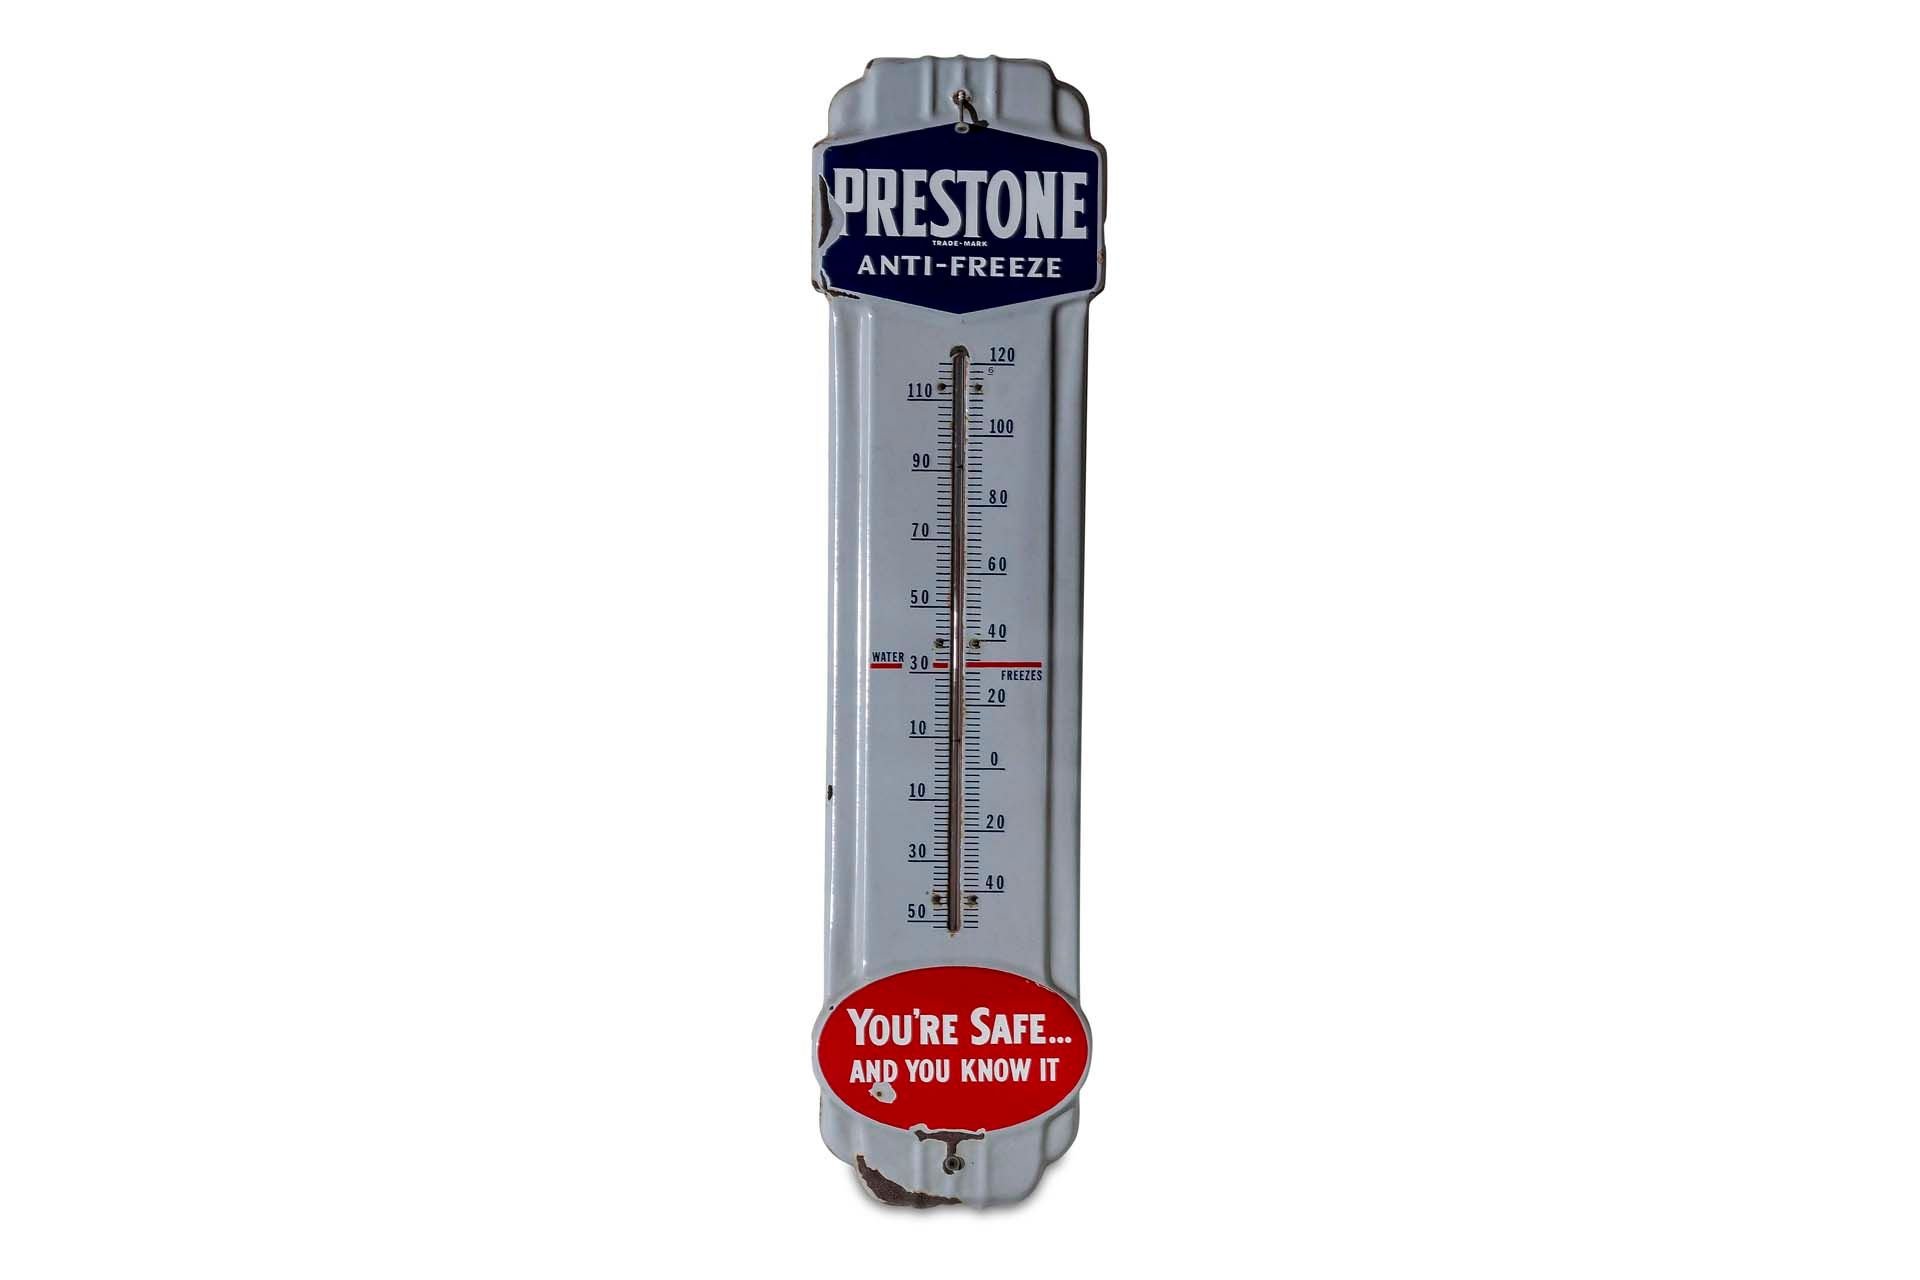 For Sale 'Prestone Anti-Freeze' Hanging Wall Thermometer